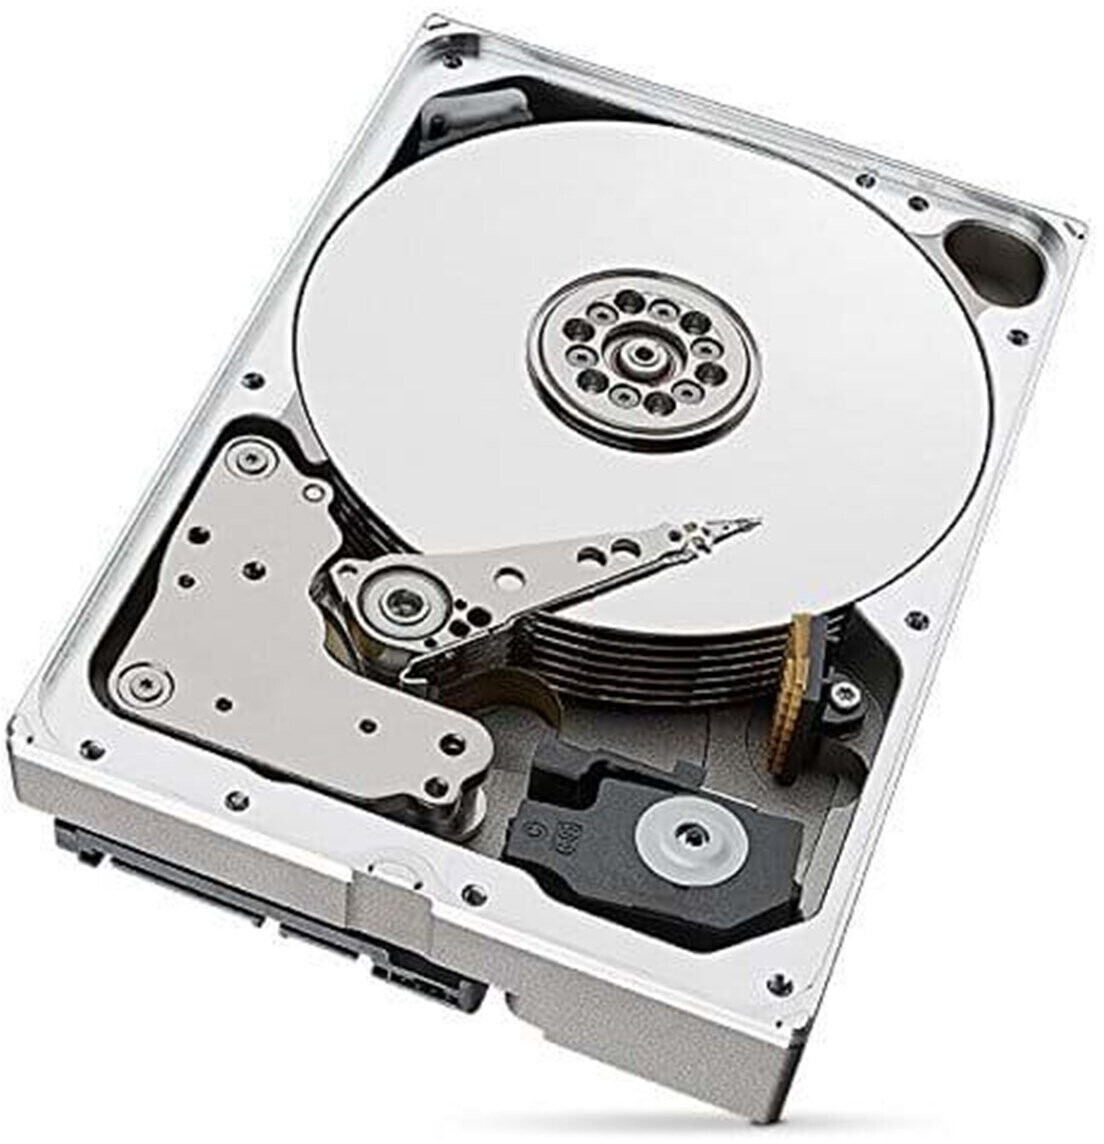 Disque Dur Interne SEAGATE IronWolf 2 To 3.5 - ST2000VN004